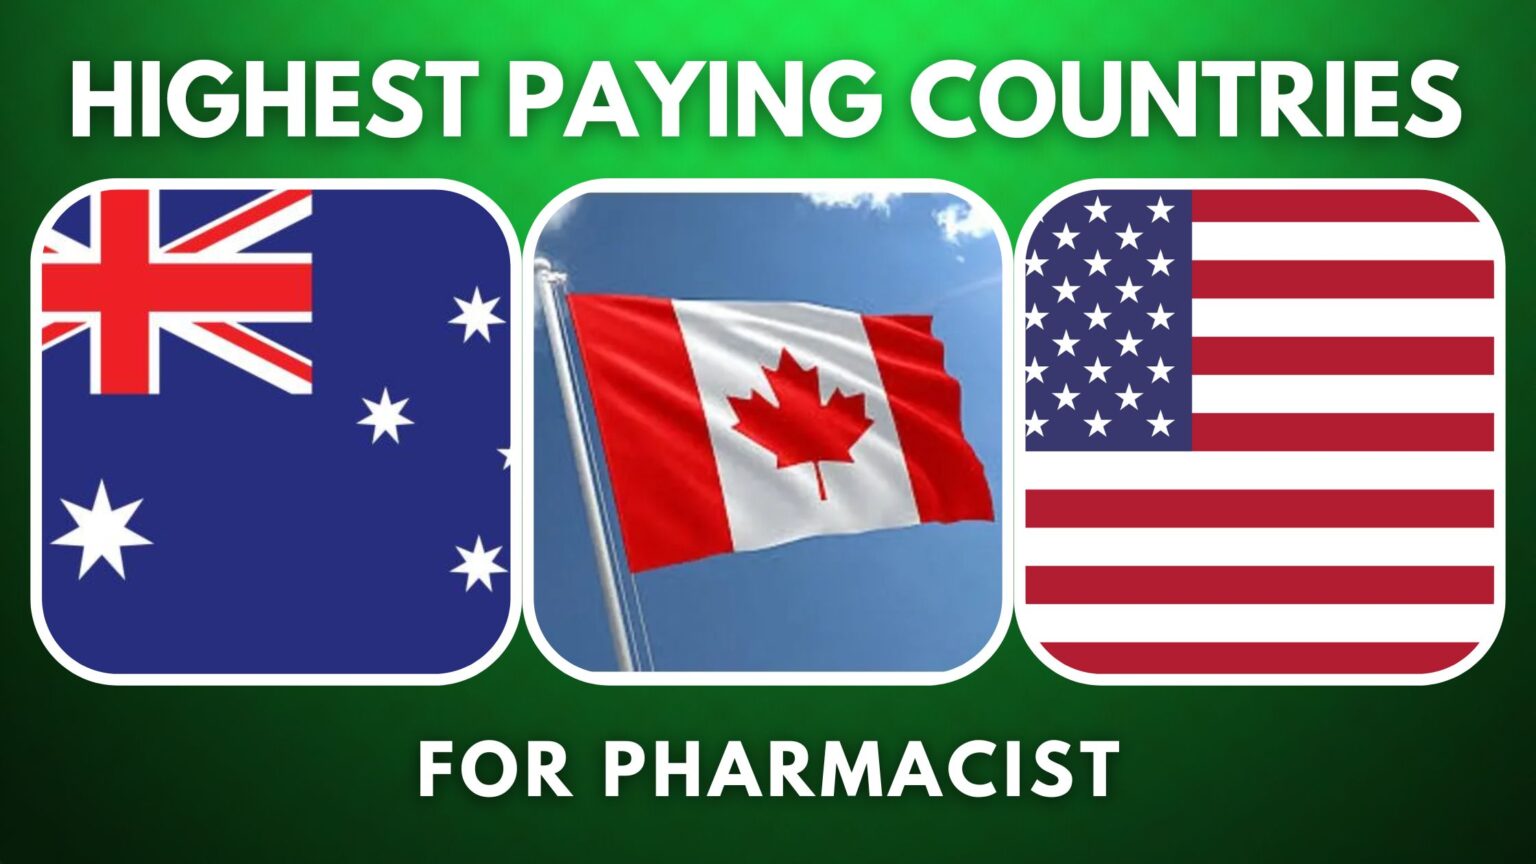 Top 10 Highest Paying Countries for Pharmacists